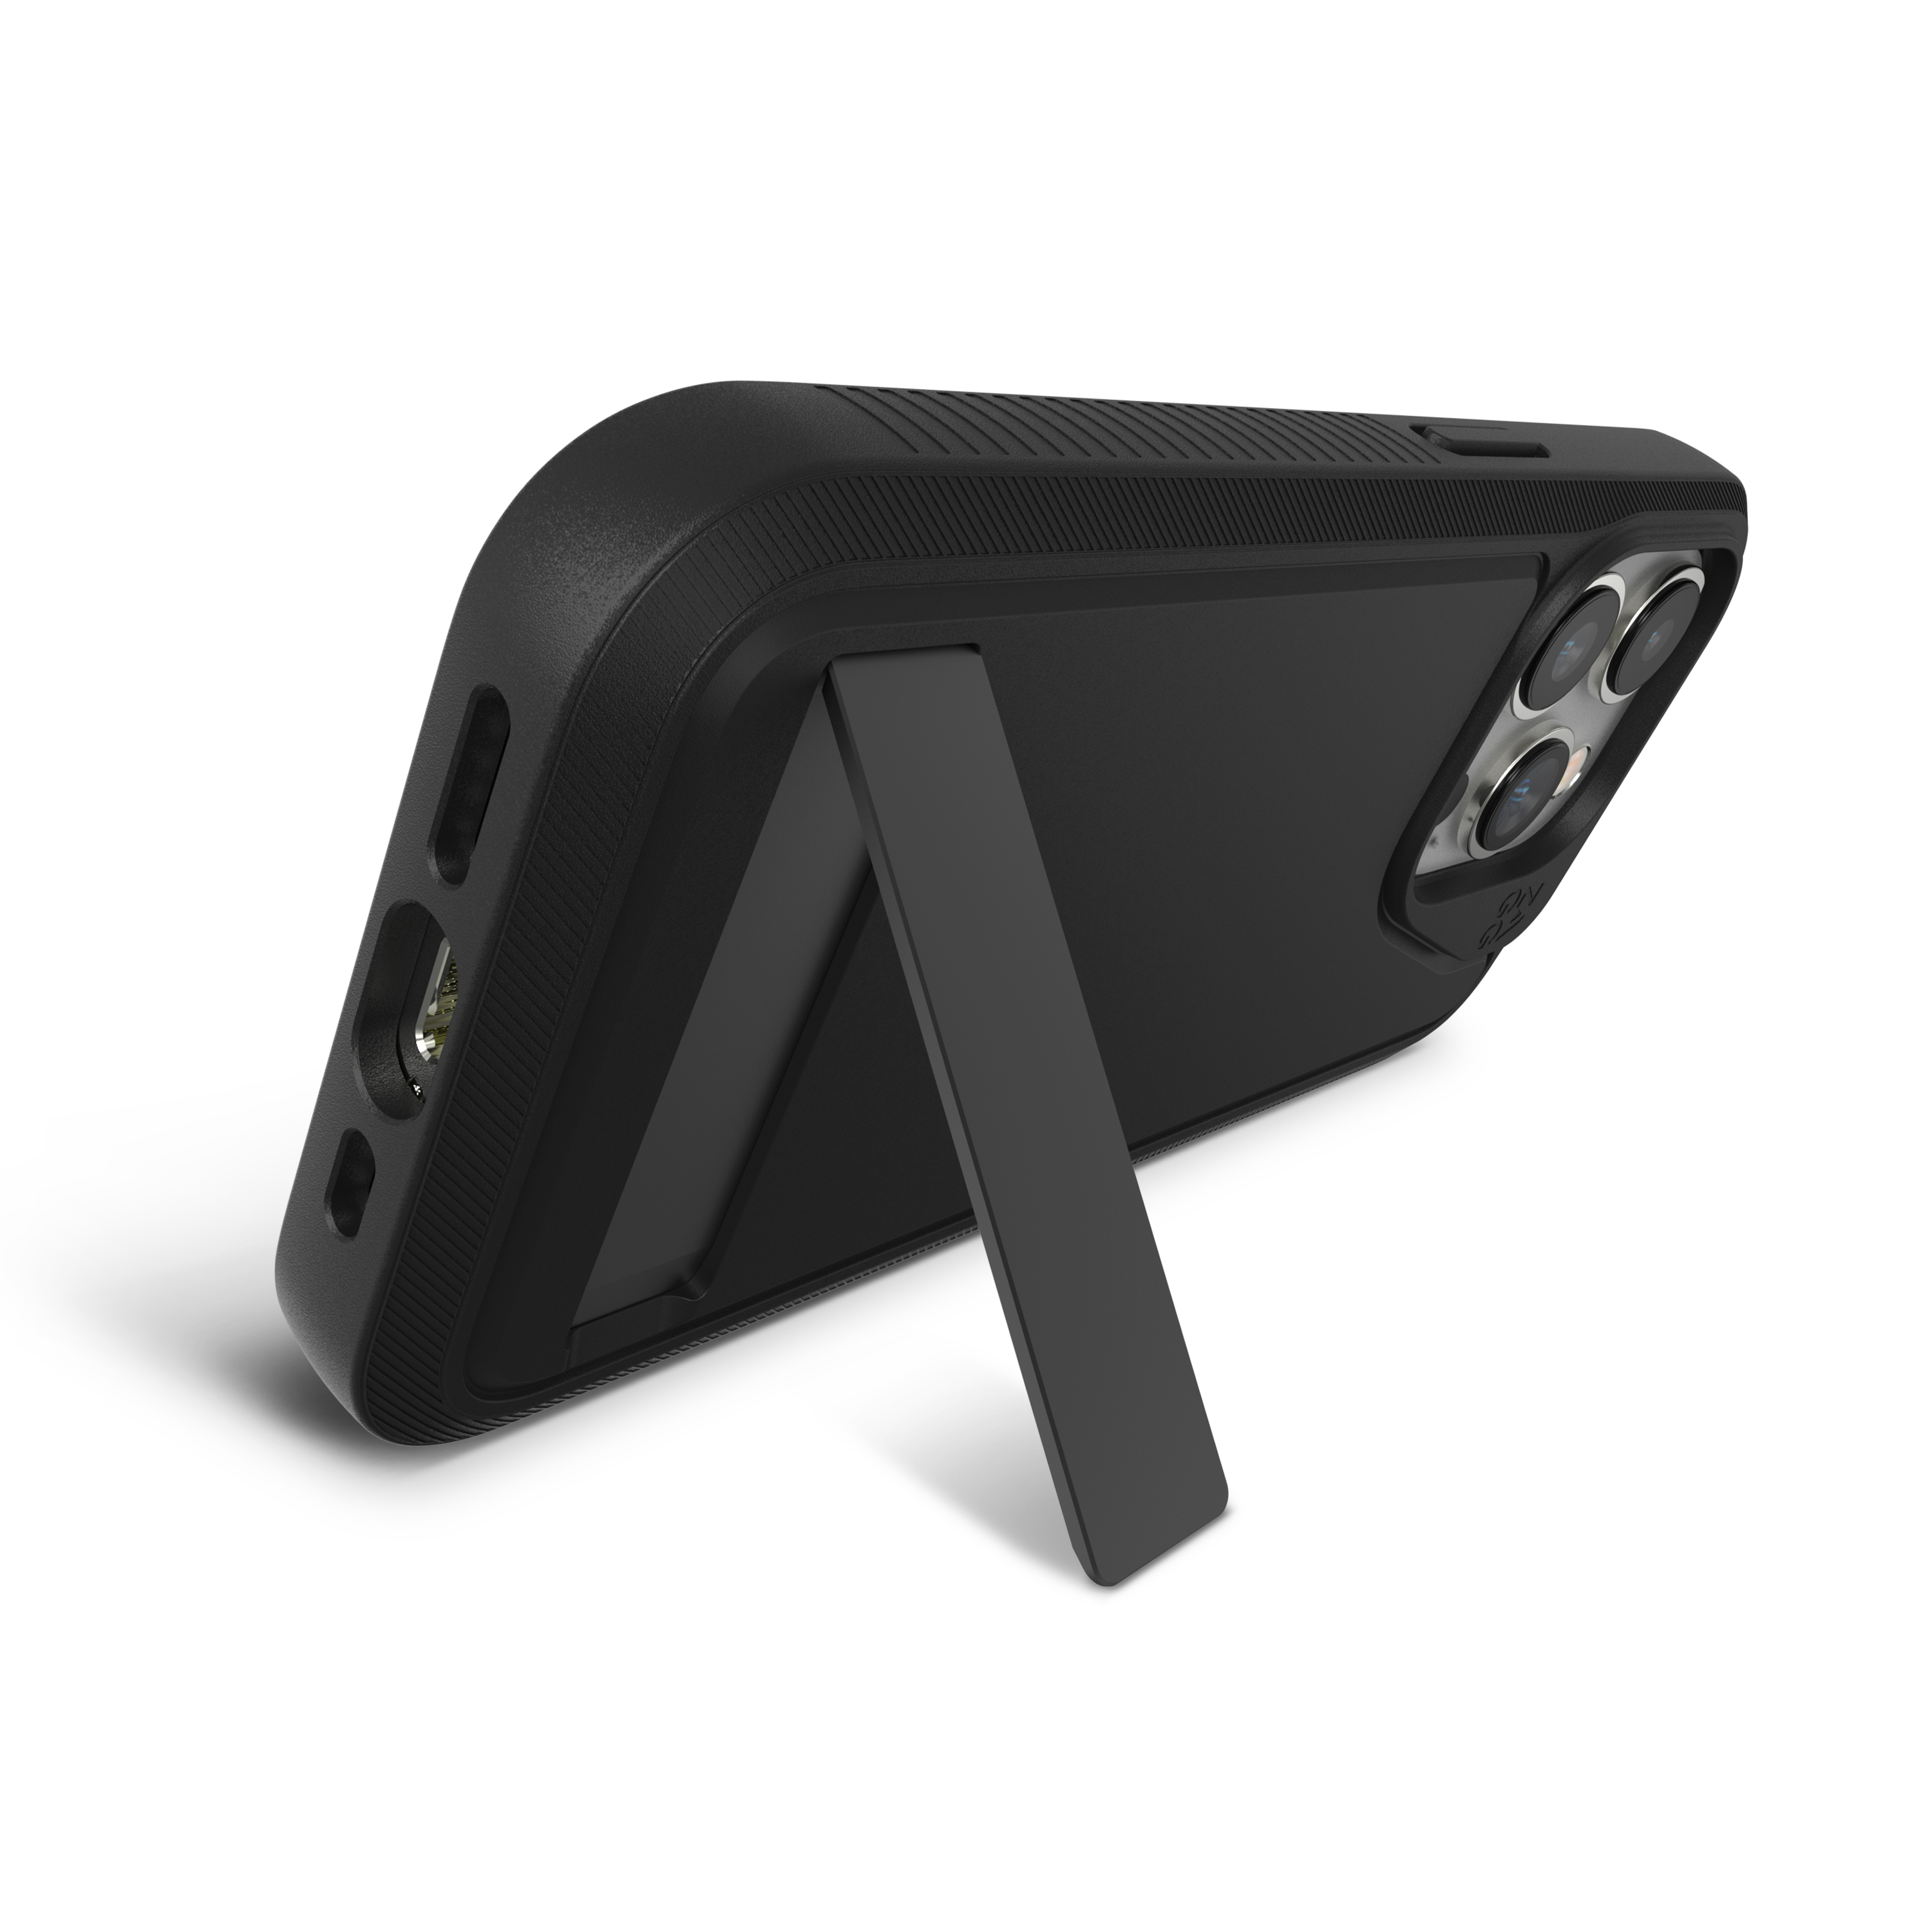 Integrated Kickstand||
The kickstand allows for hands-free viewing, and it folds back flush with the case.